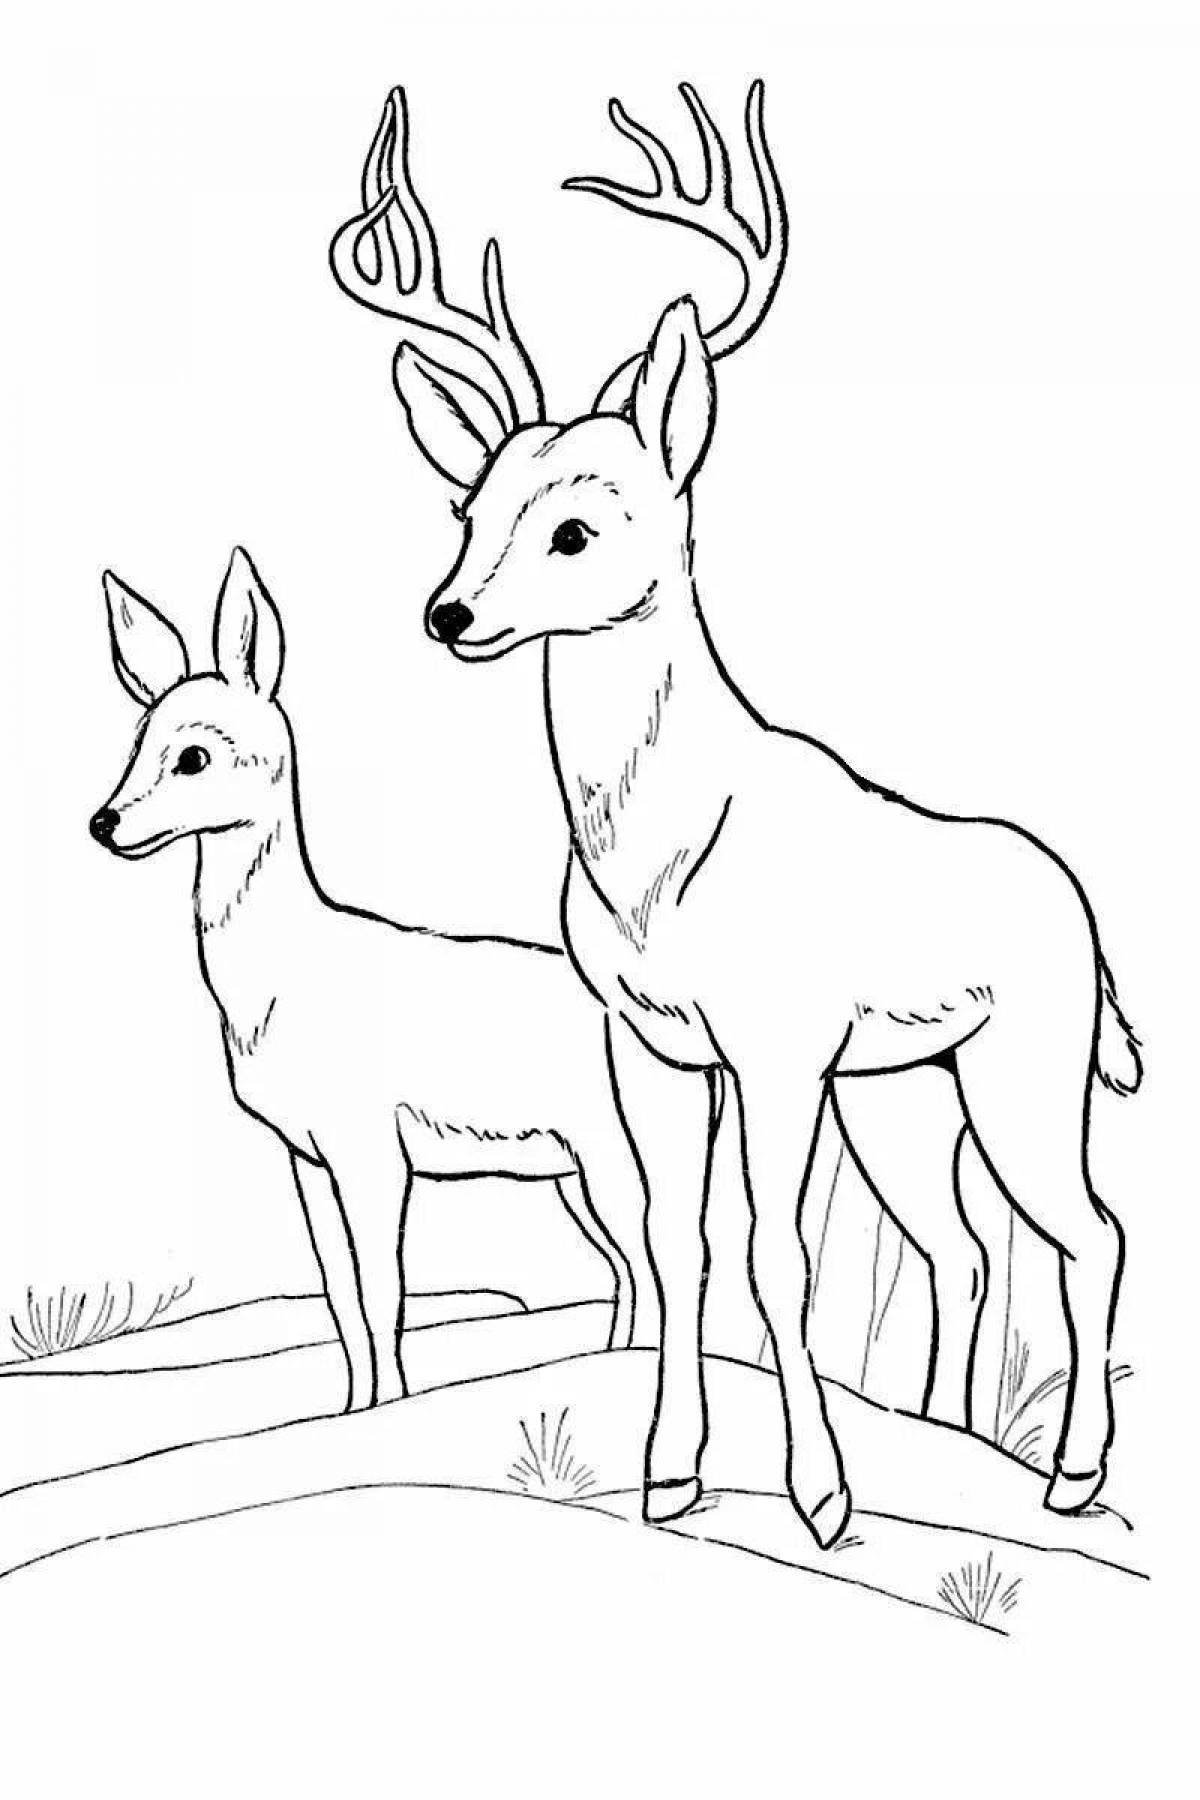 Fun roe deer coloring for the little ones